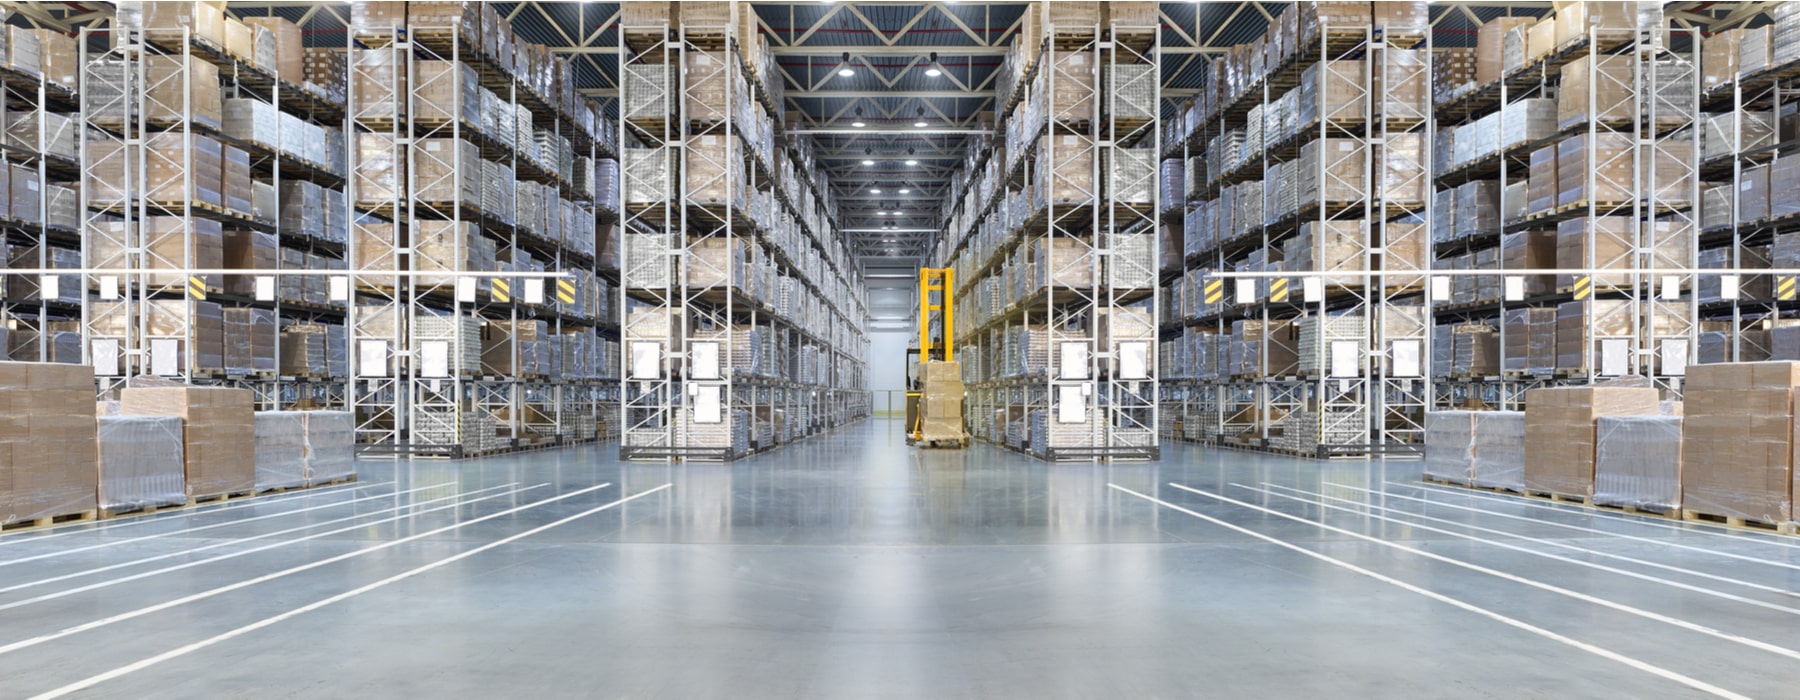 5 Latest Tech Upgrades to Increase Safety in Manufacturing Facilities and Warehouses